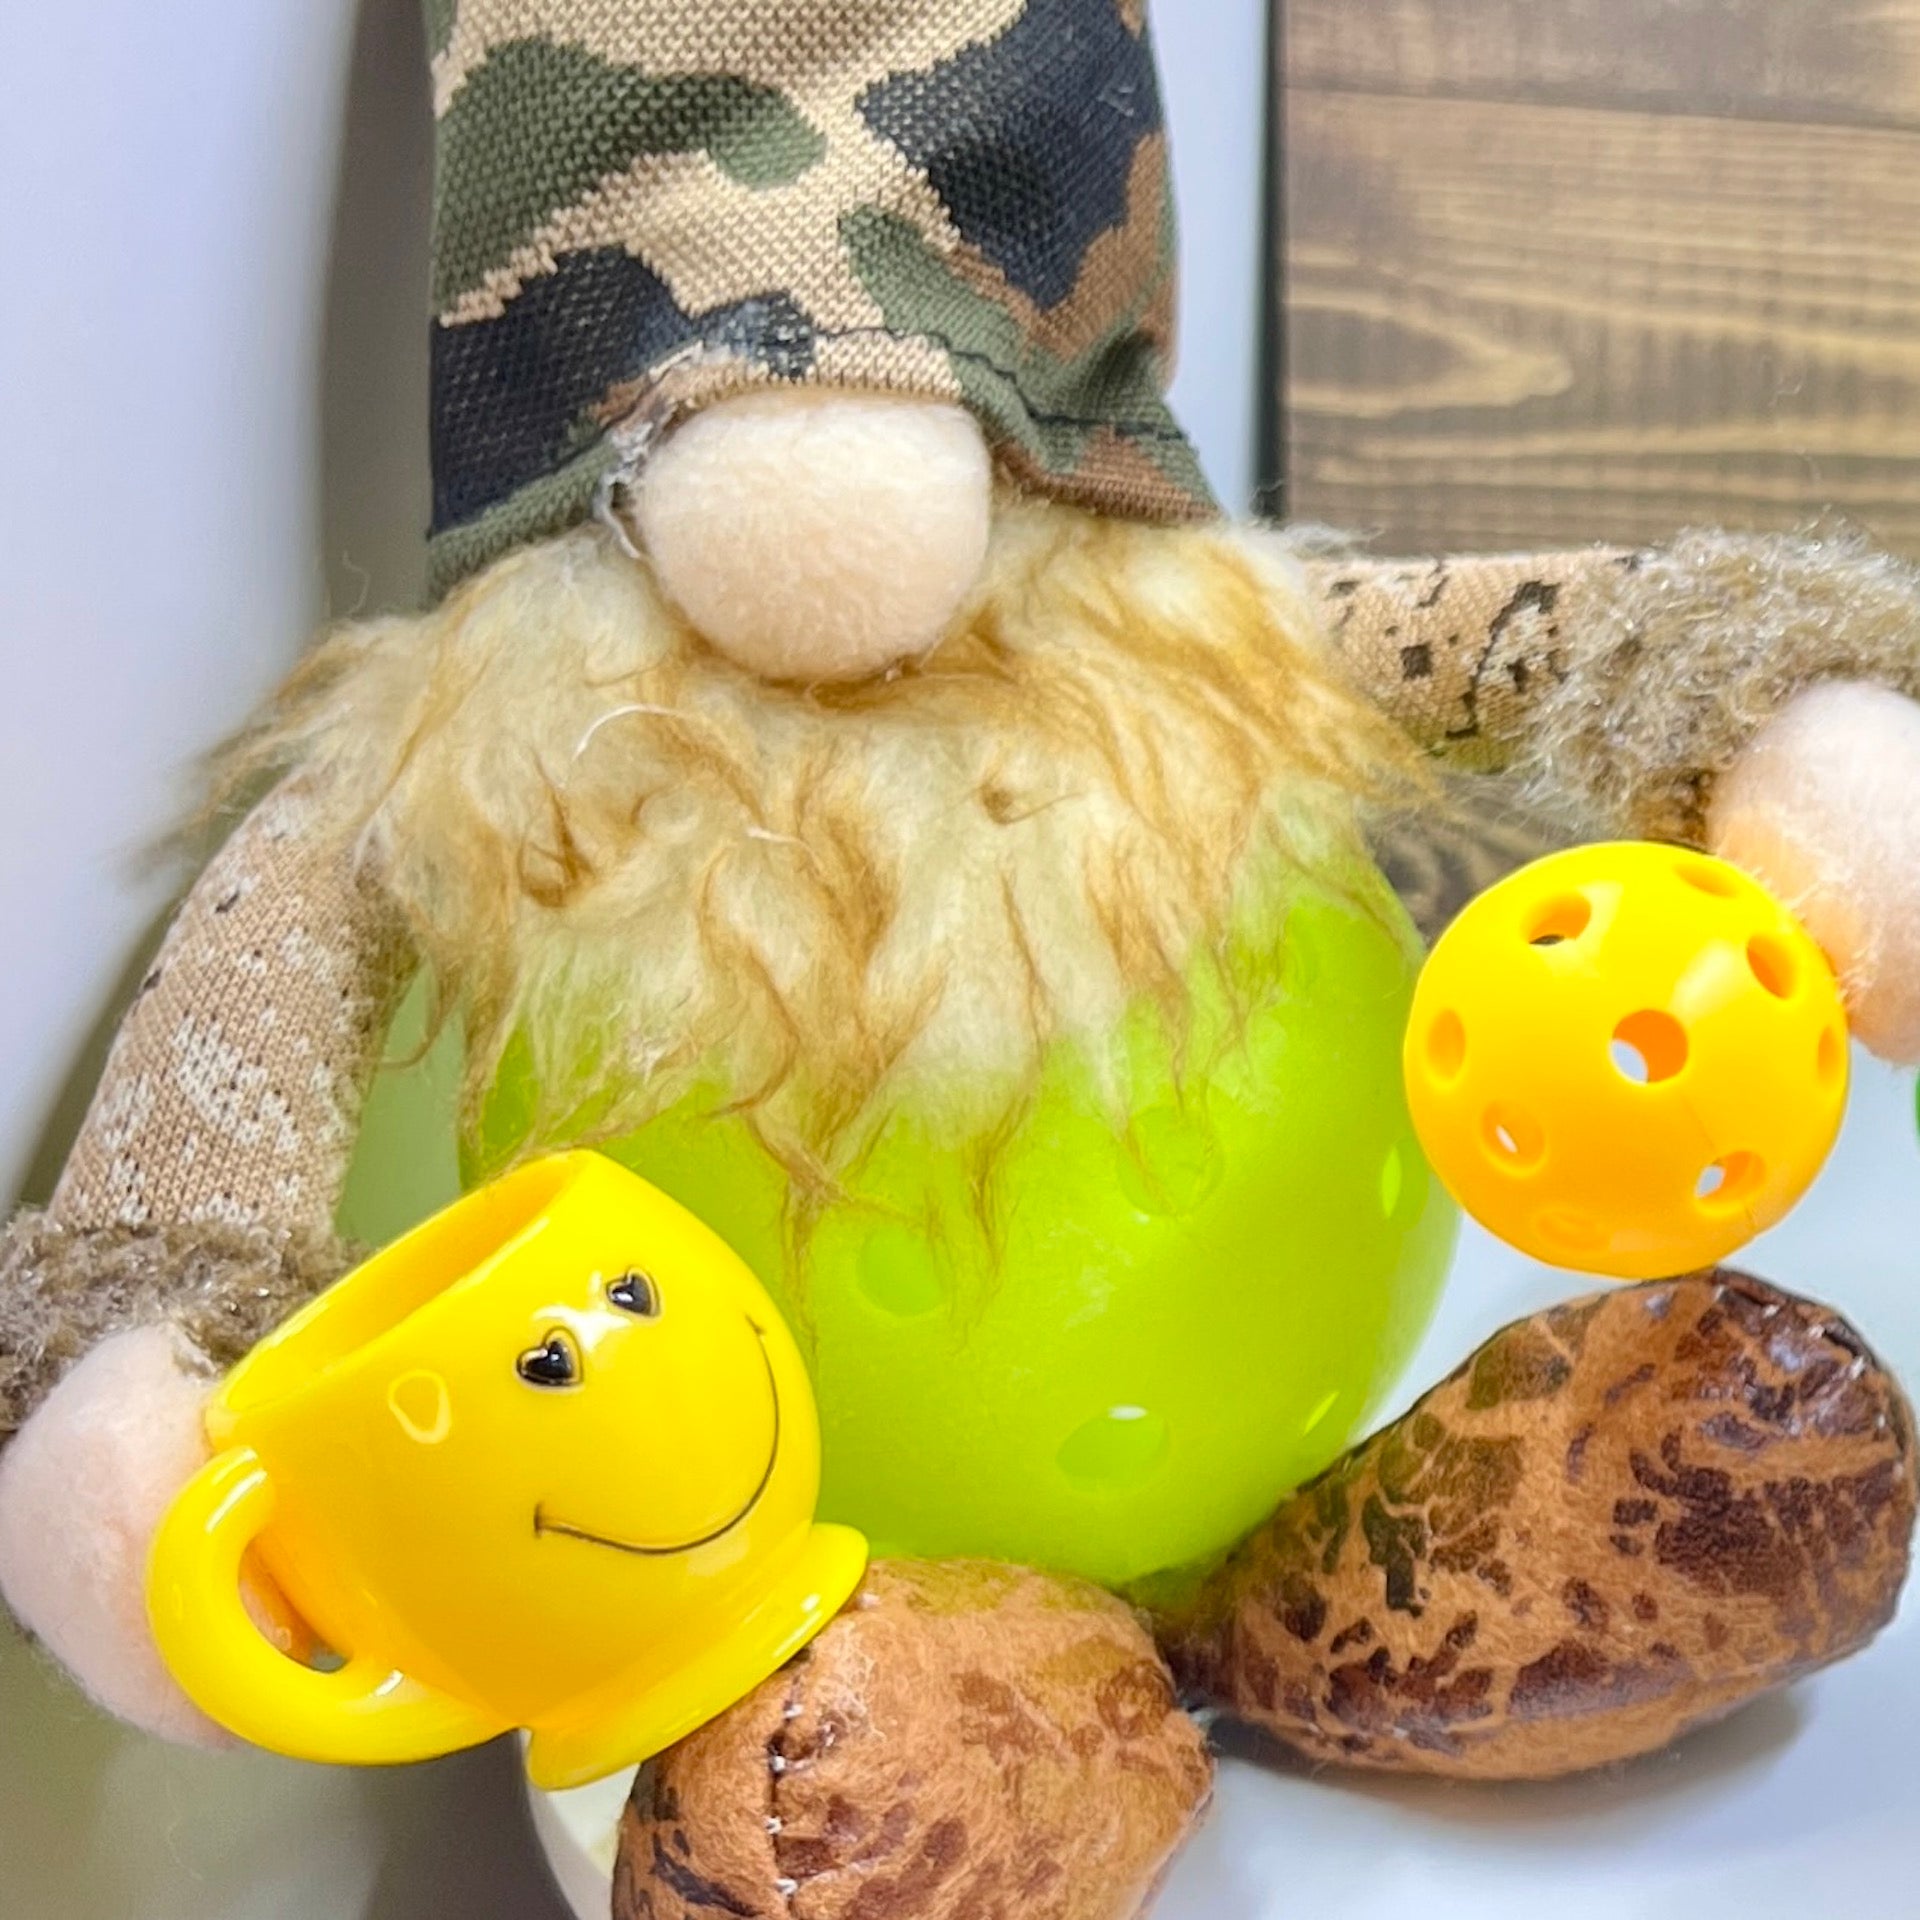 LARGE CAMO & COFFEE PICKLEBALL GNOME DECORATION AND GIFT!!  These large-sized pickleball gnomes are perfect for decoration or gifts for your pickleball addicted friends. Each Gnome is free-sitting and has a coffee cup for enjoyment. Adding a Pickleball Gnome to your house only makes it better.